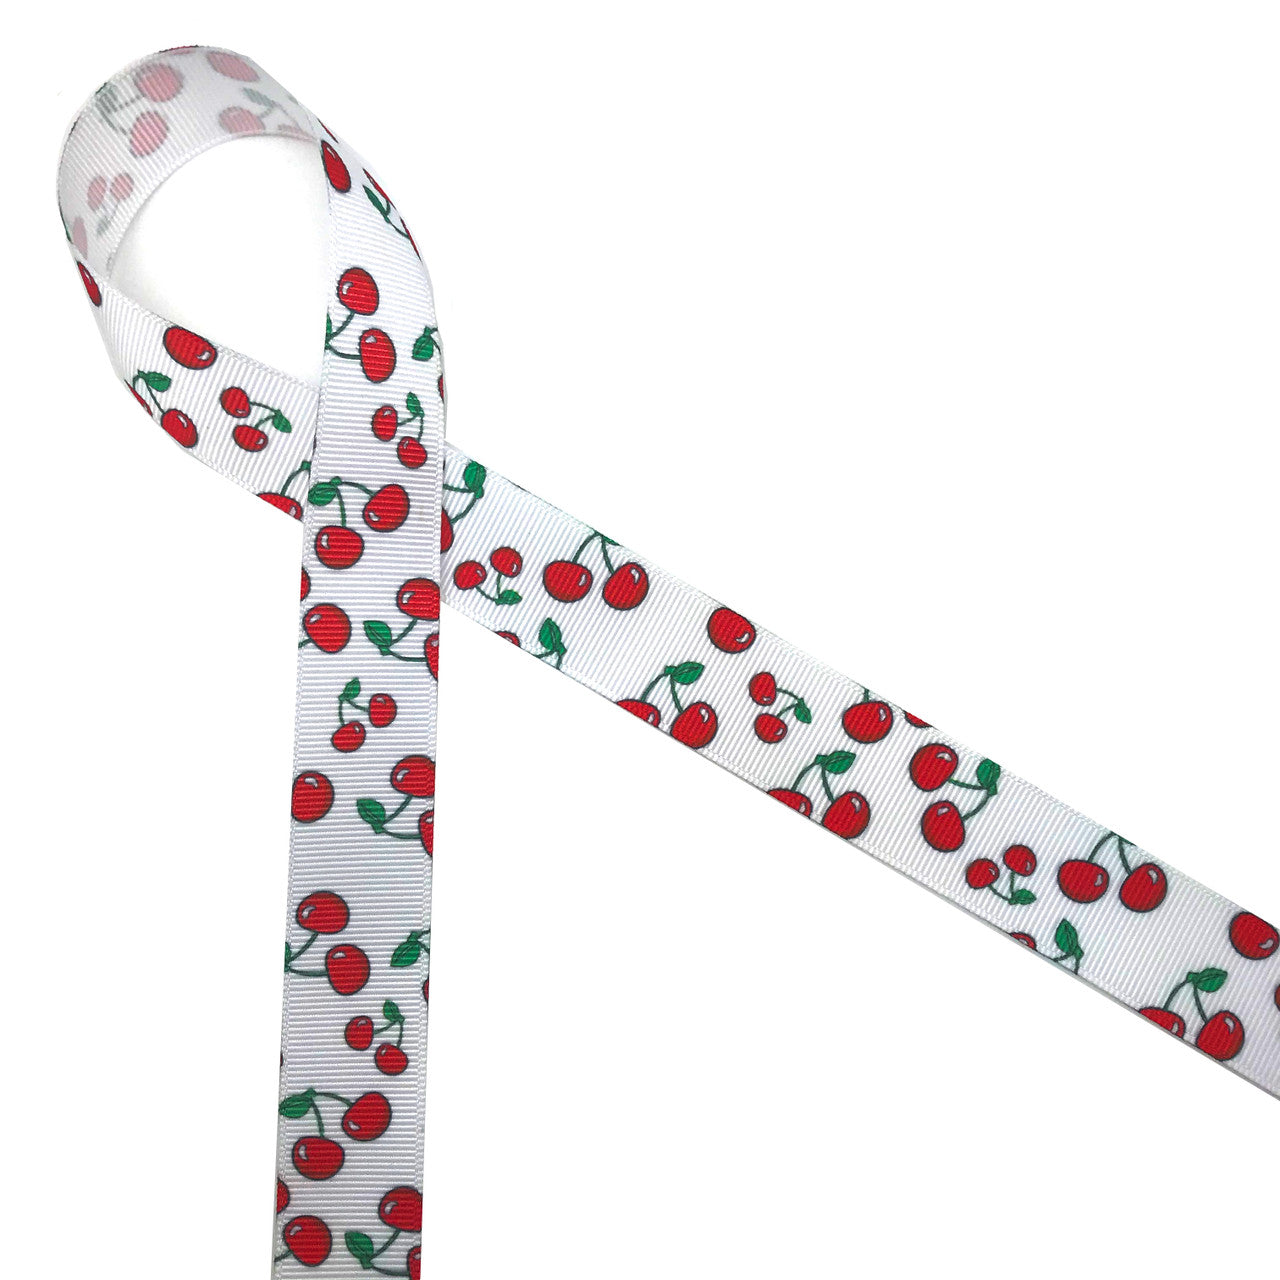 Life is just a bowl of cherries and ours are the sweetest ones! Our cherries with their green leaves are printed on 7/8"  grosgrain ribbon and are ideal for hair bows, cherry themed Summer events, gifts and craft projects! All our ribbon is designed and printed in the USA